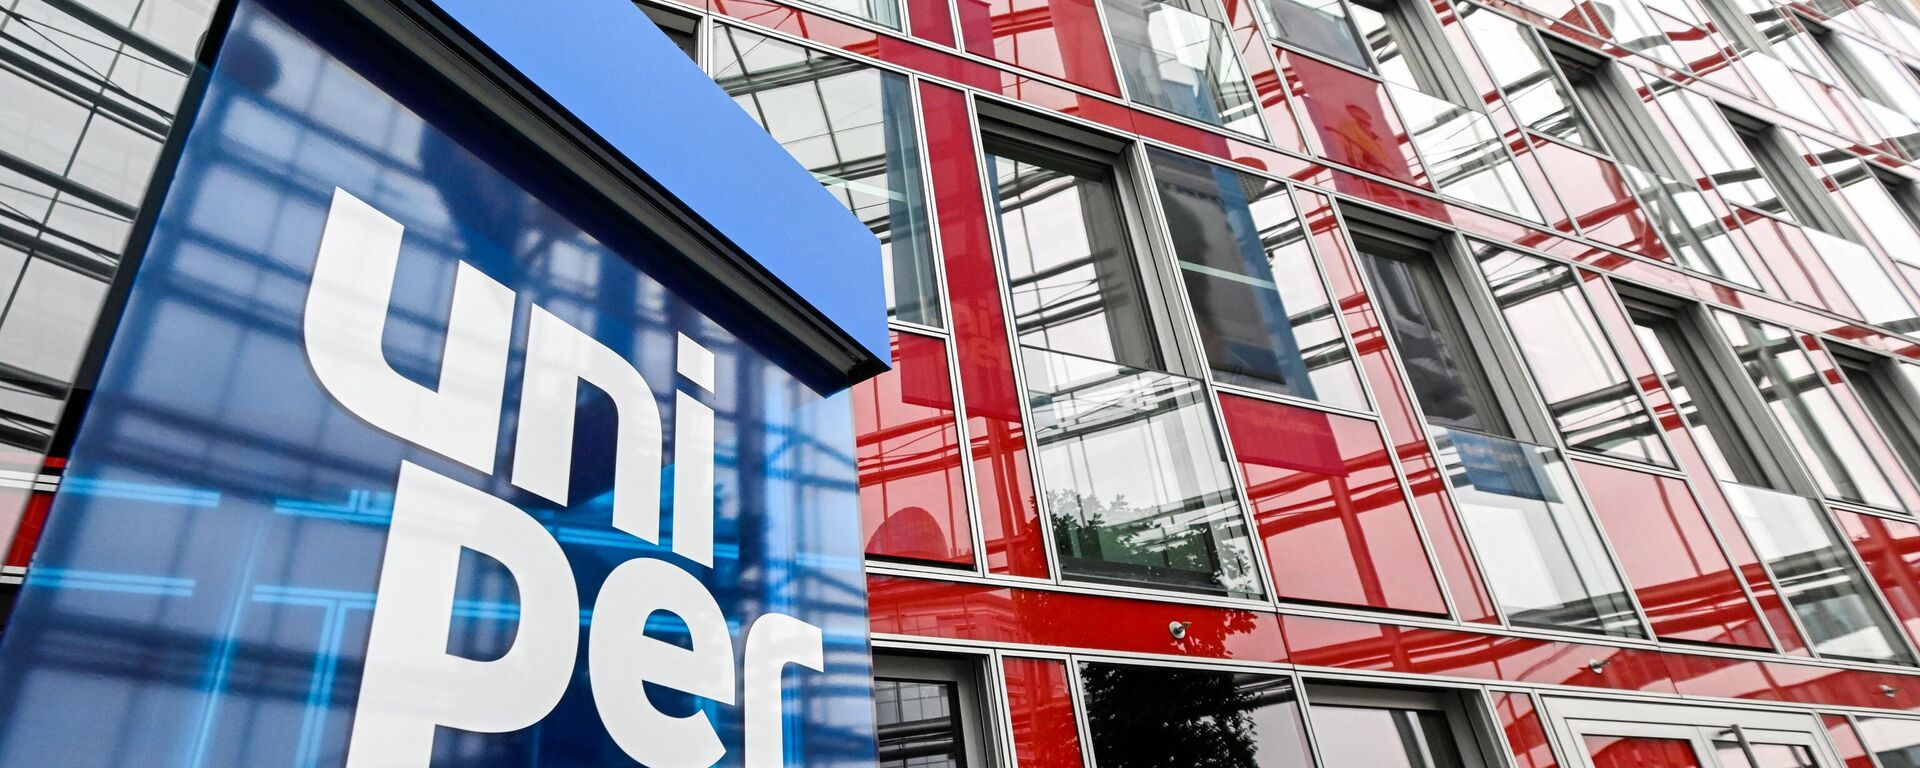 This file photo taken on July 22, 2022 shows the logo of energy supplier Uniper in the entrance hall at the company's headquarters in Dusseldorf, western Germany - Sputnik International, 1920, 14.09.2022